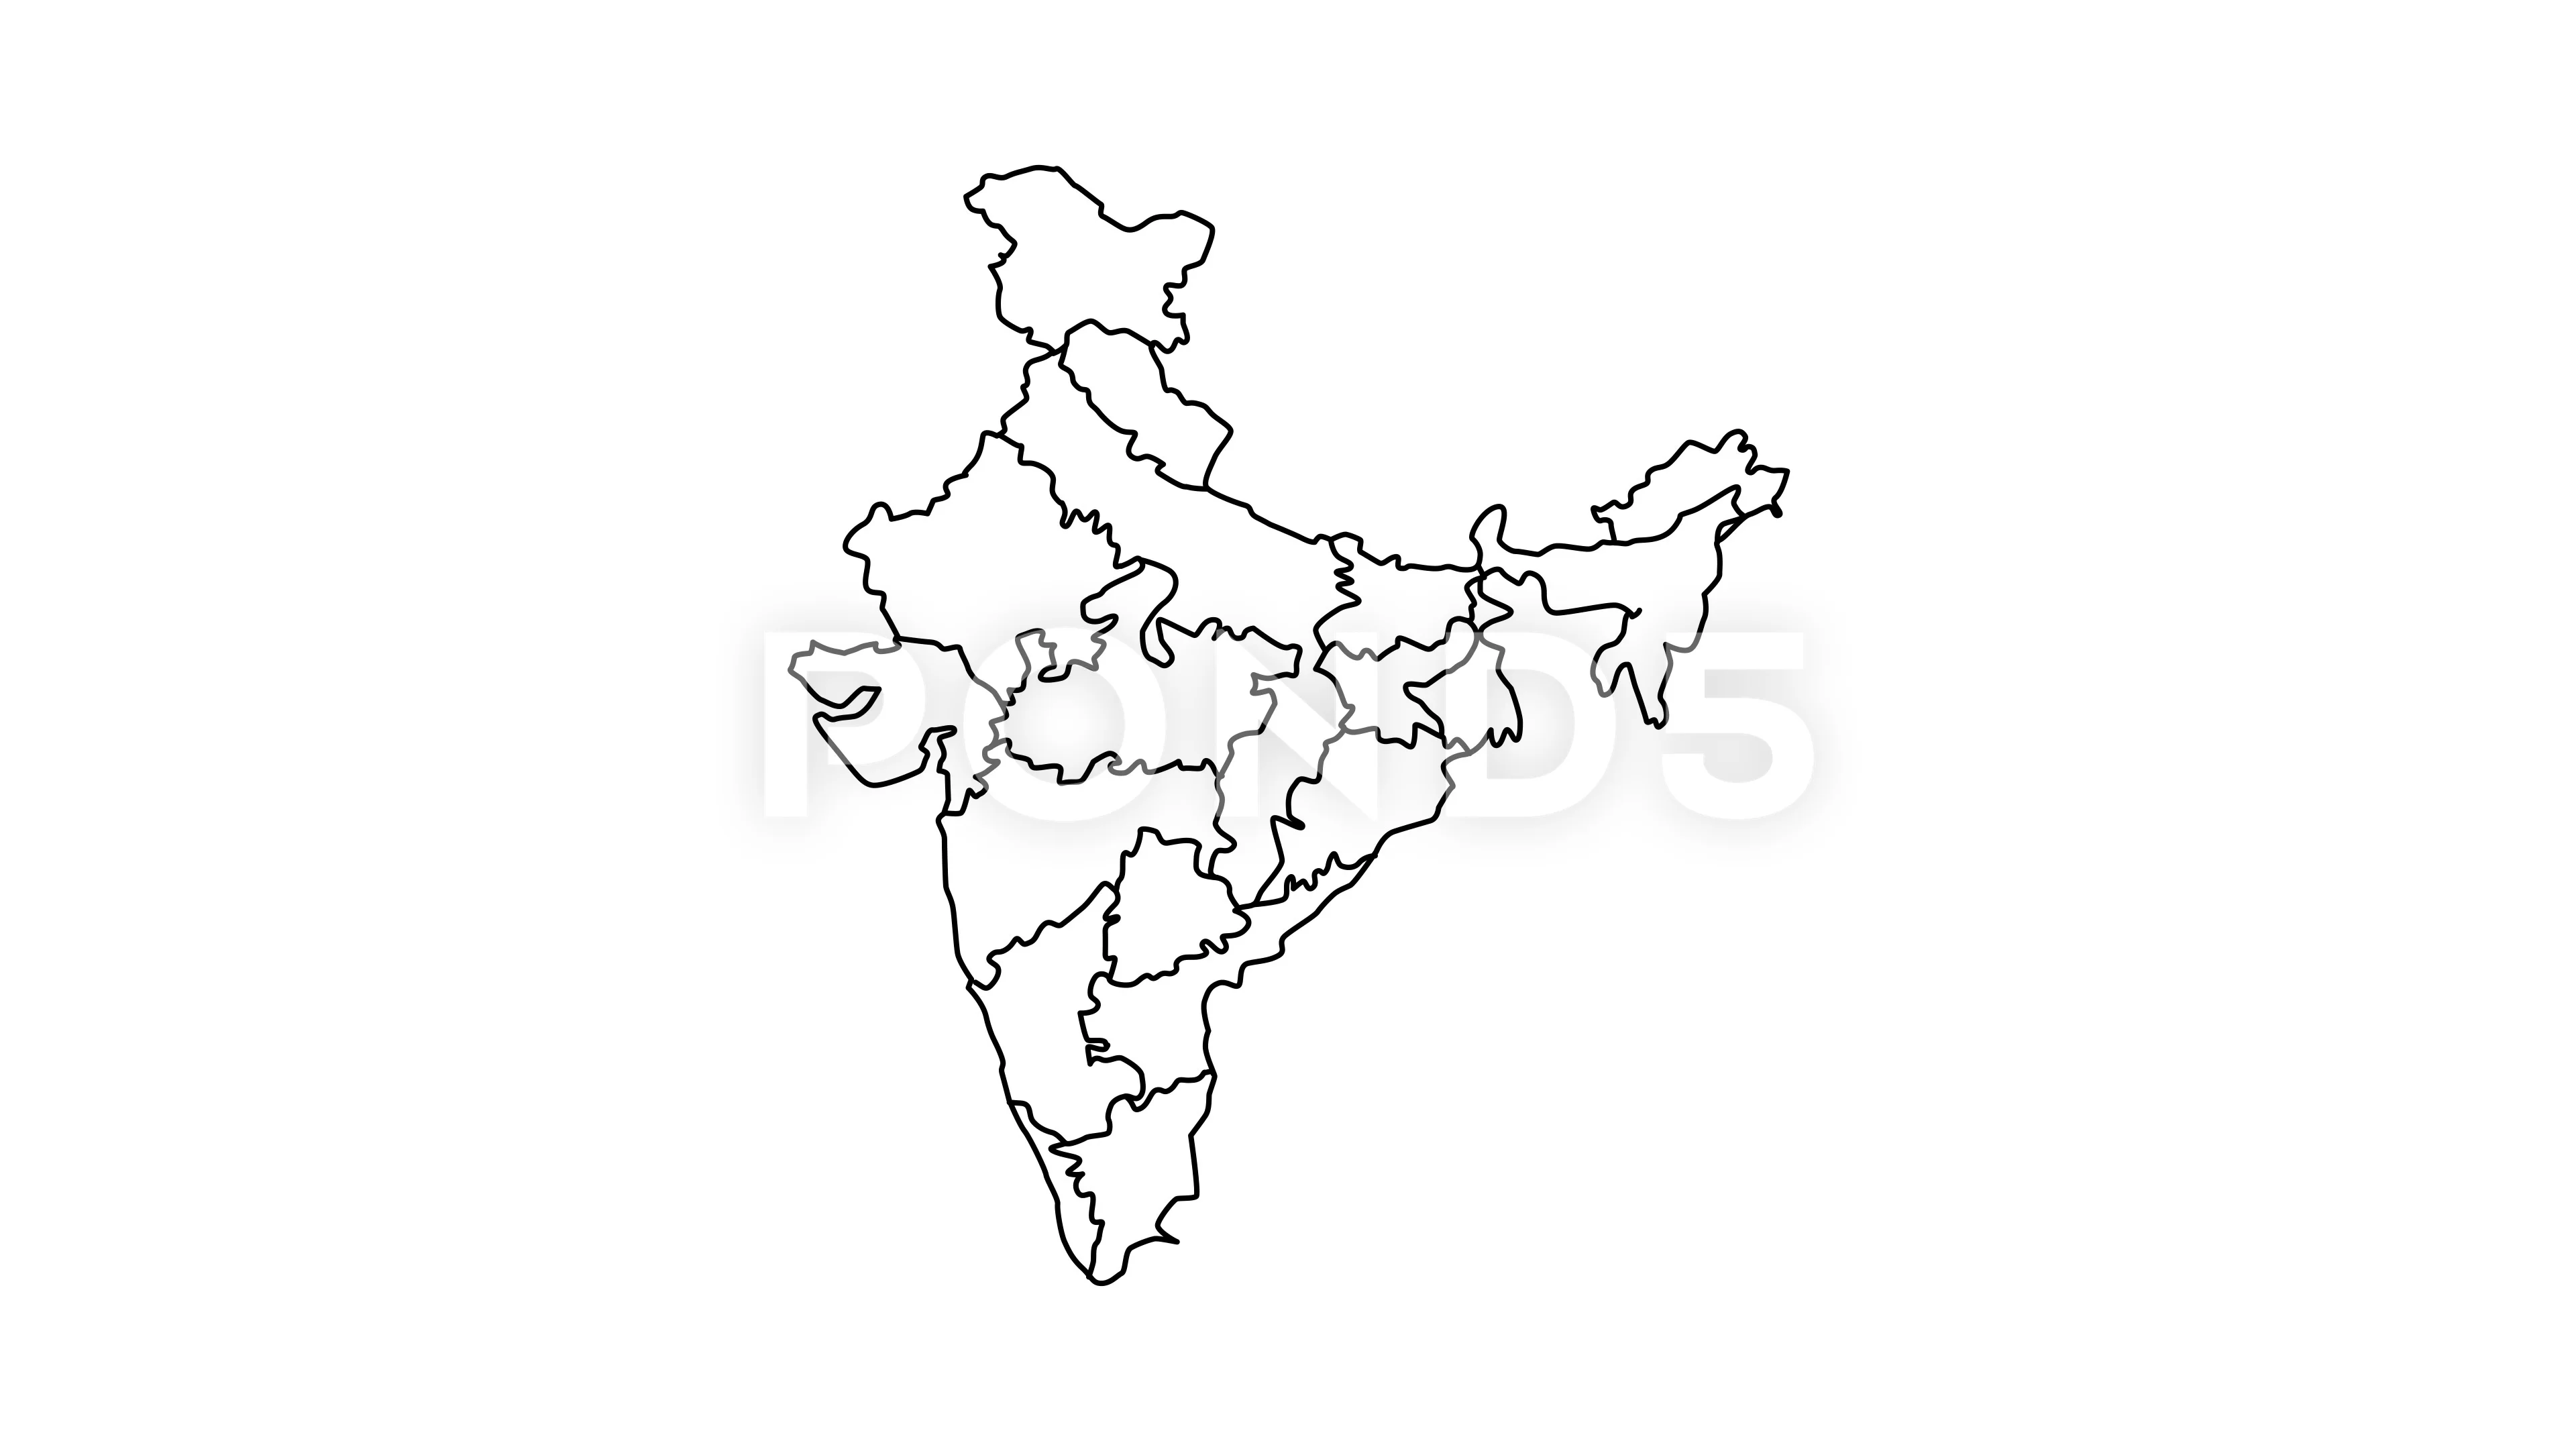 India Map Sketch Stock Photos and Images - 123RF